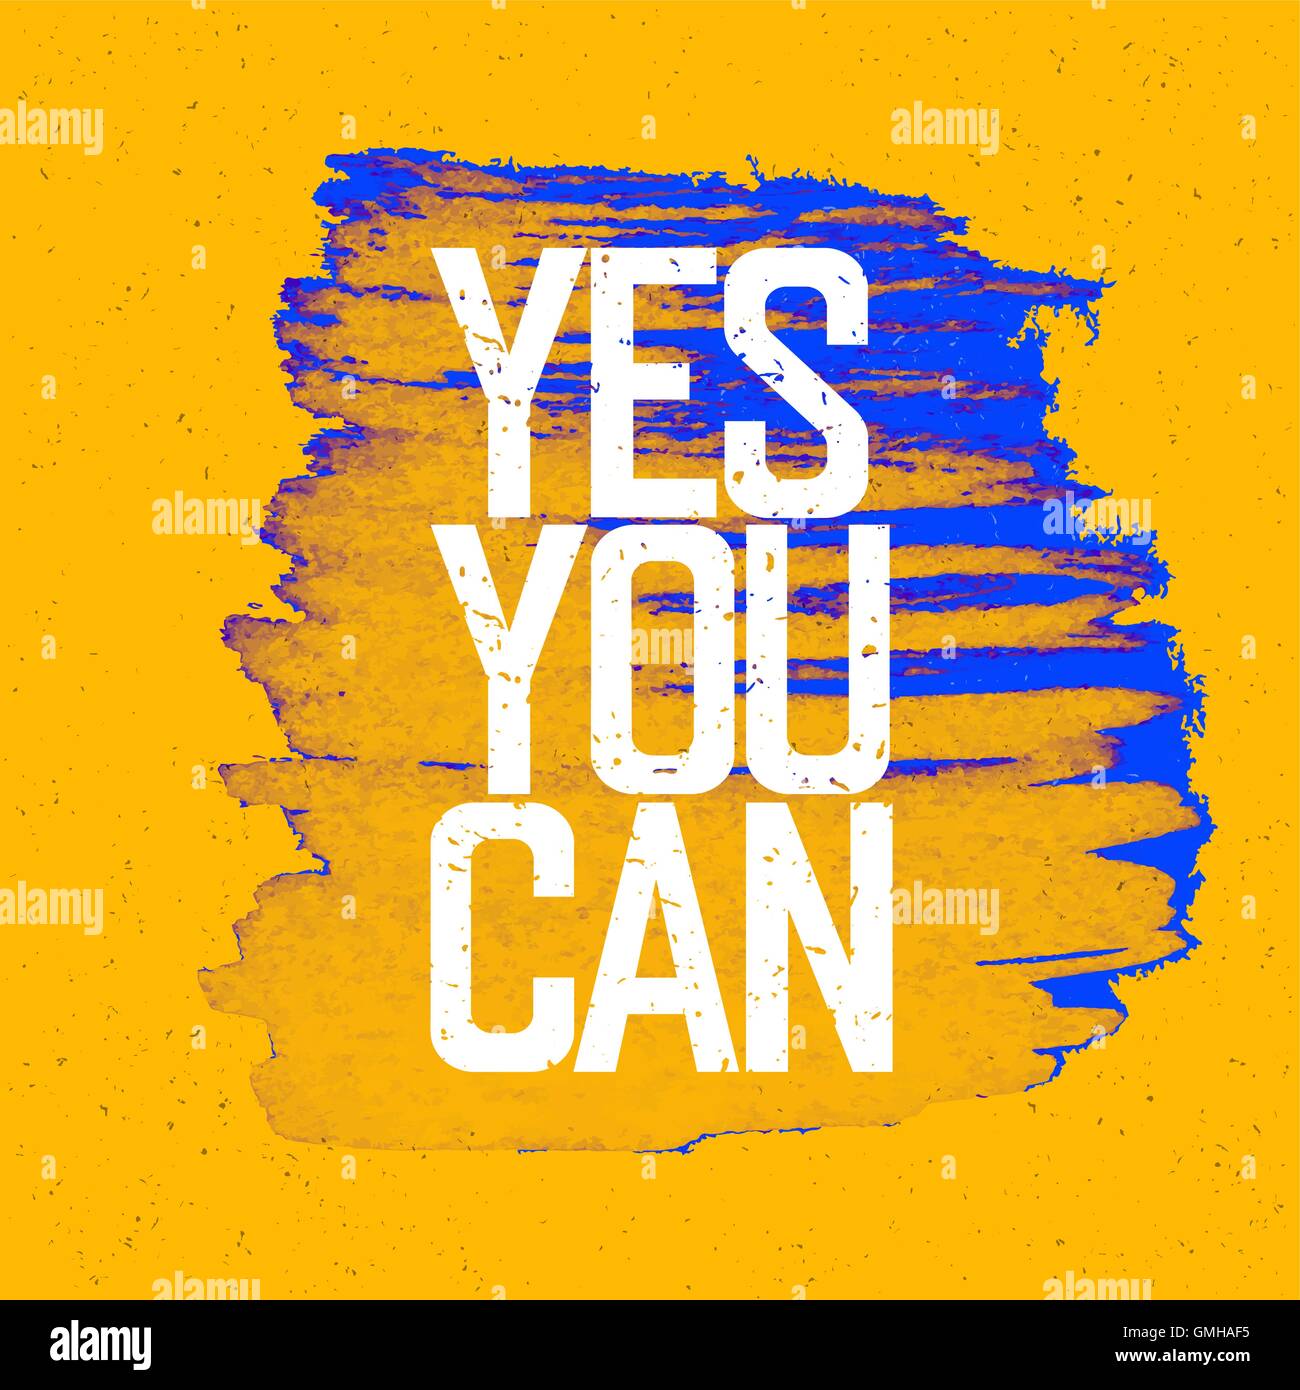 https://c8.alamy.com/comp/GMHAF5/motivational-poster-with-lettering-yes-you-can-on-yellow-pape-GMHAF5.jpg